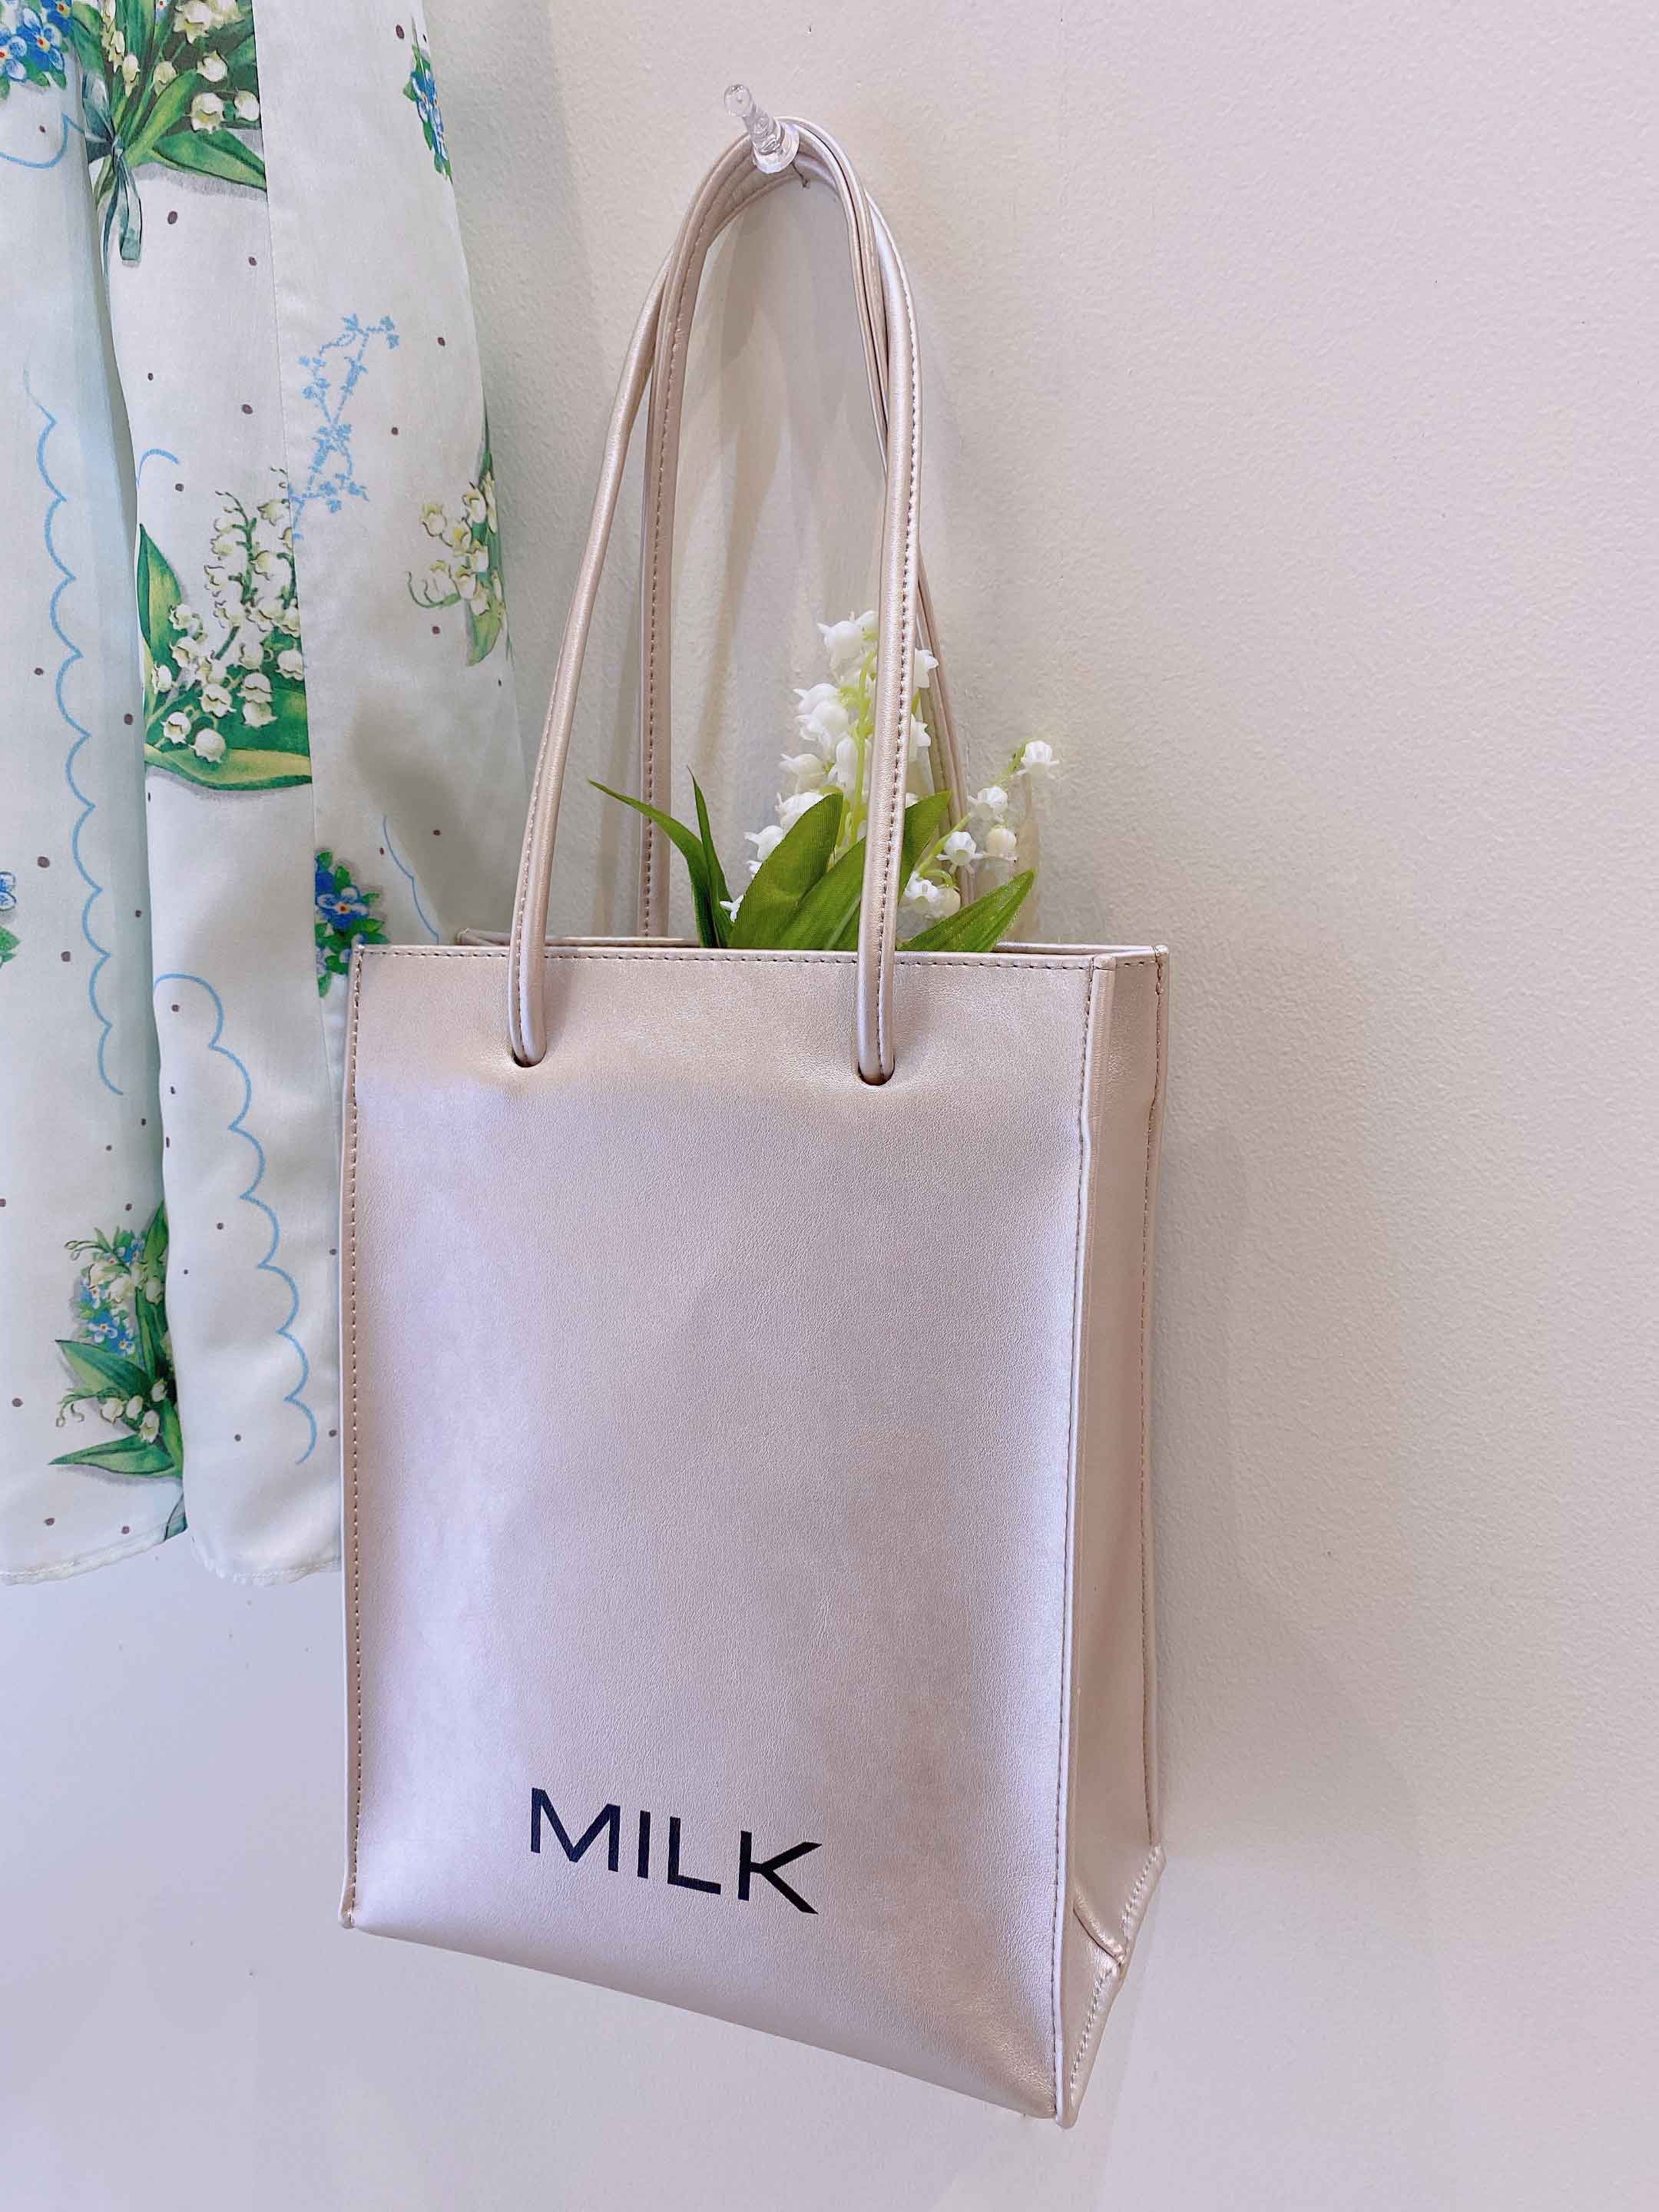 MILK」2021 Spring Collection展示会から新作をレポート！ 注目の ...